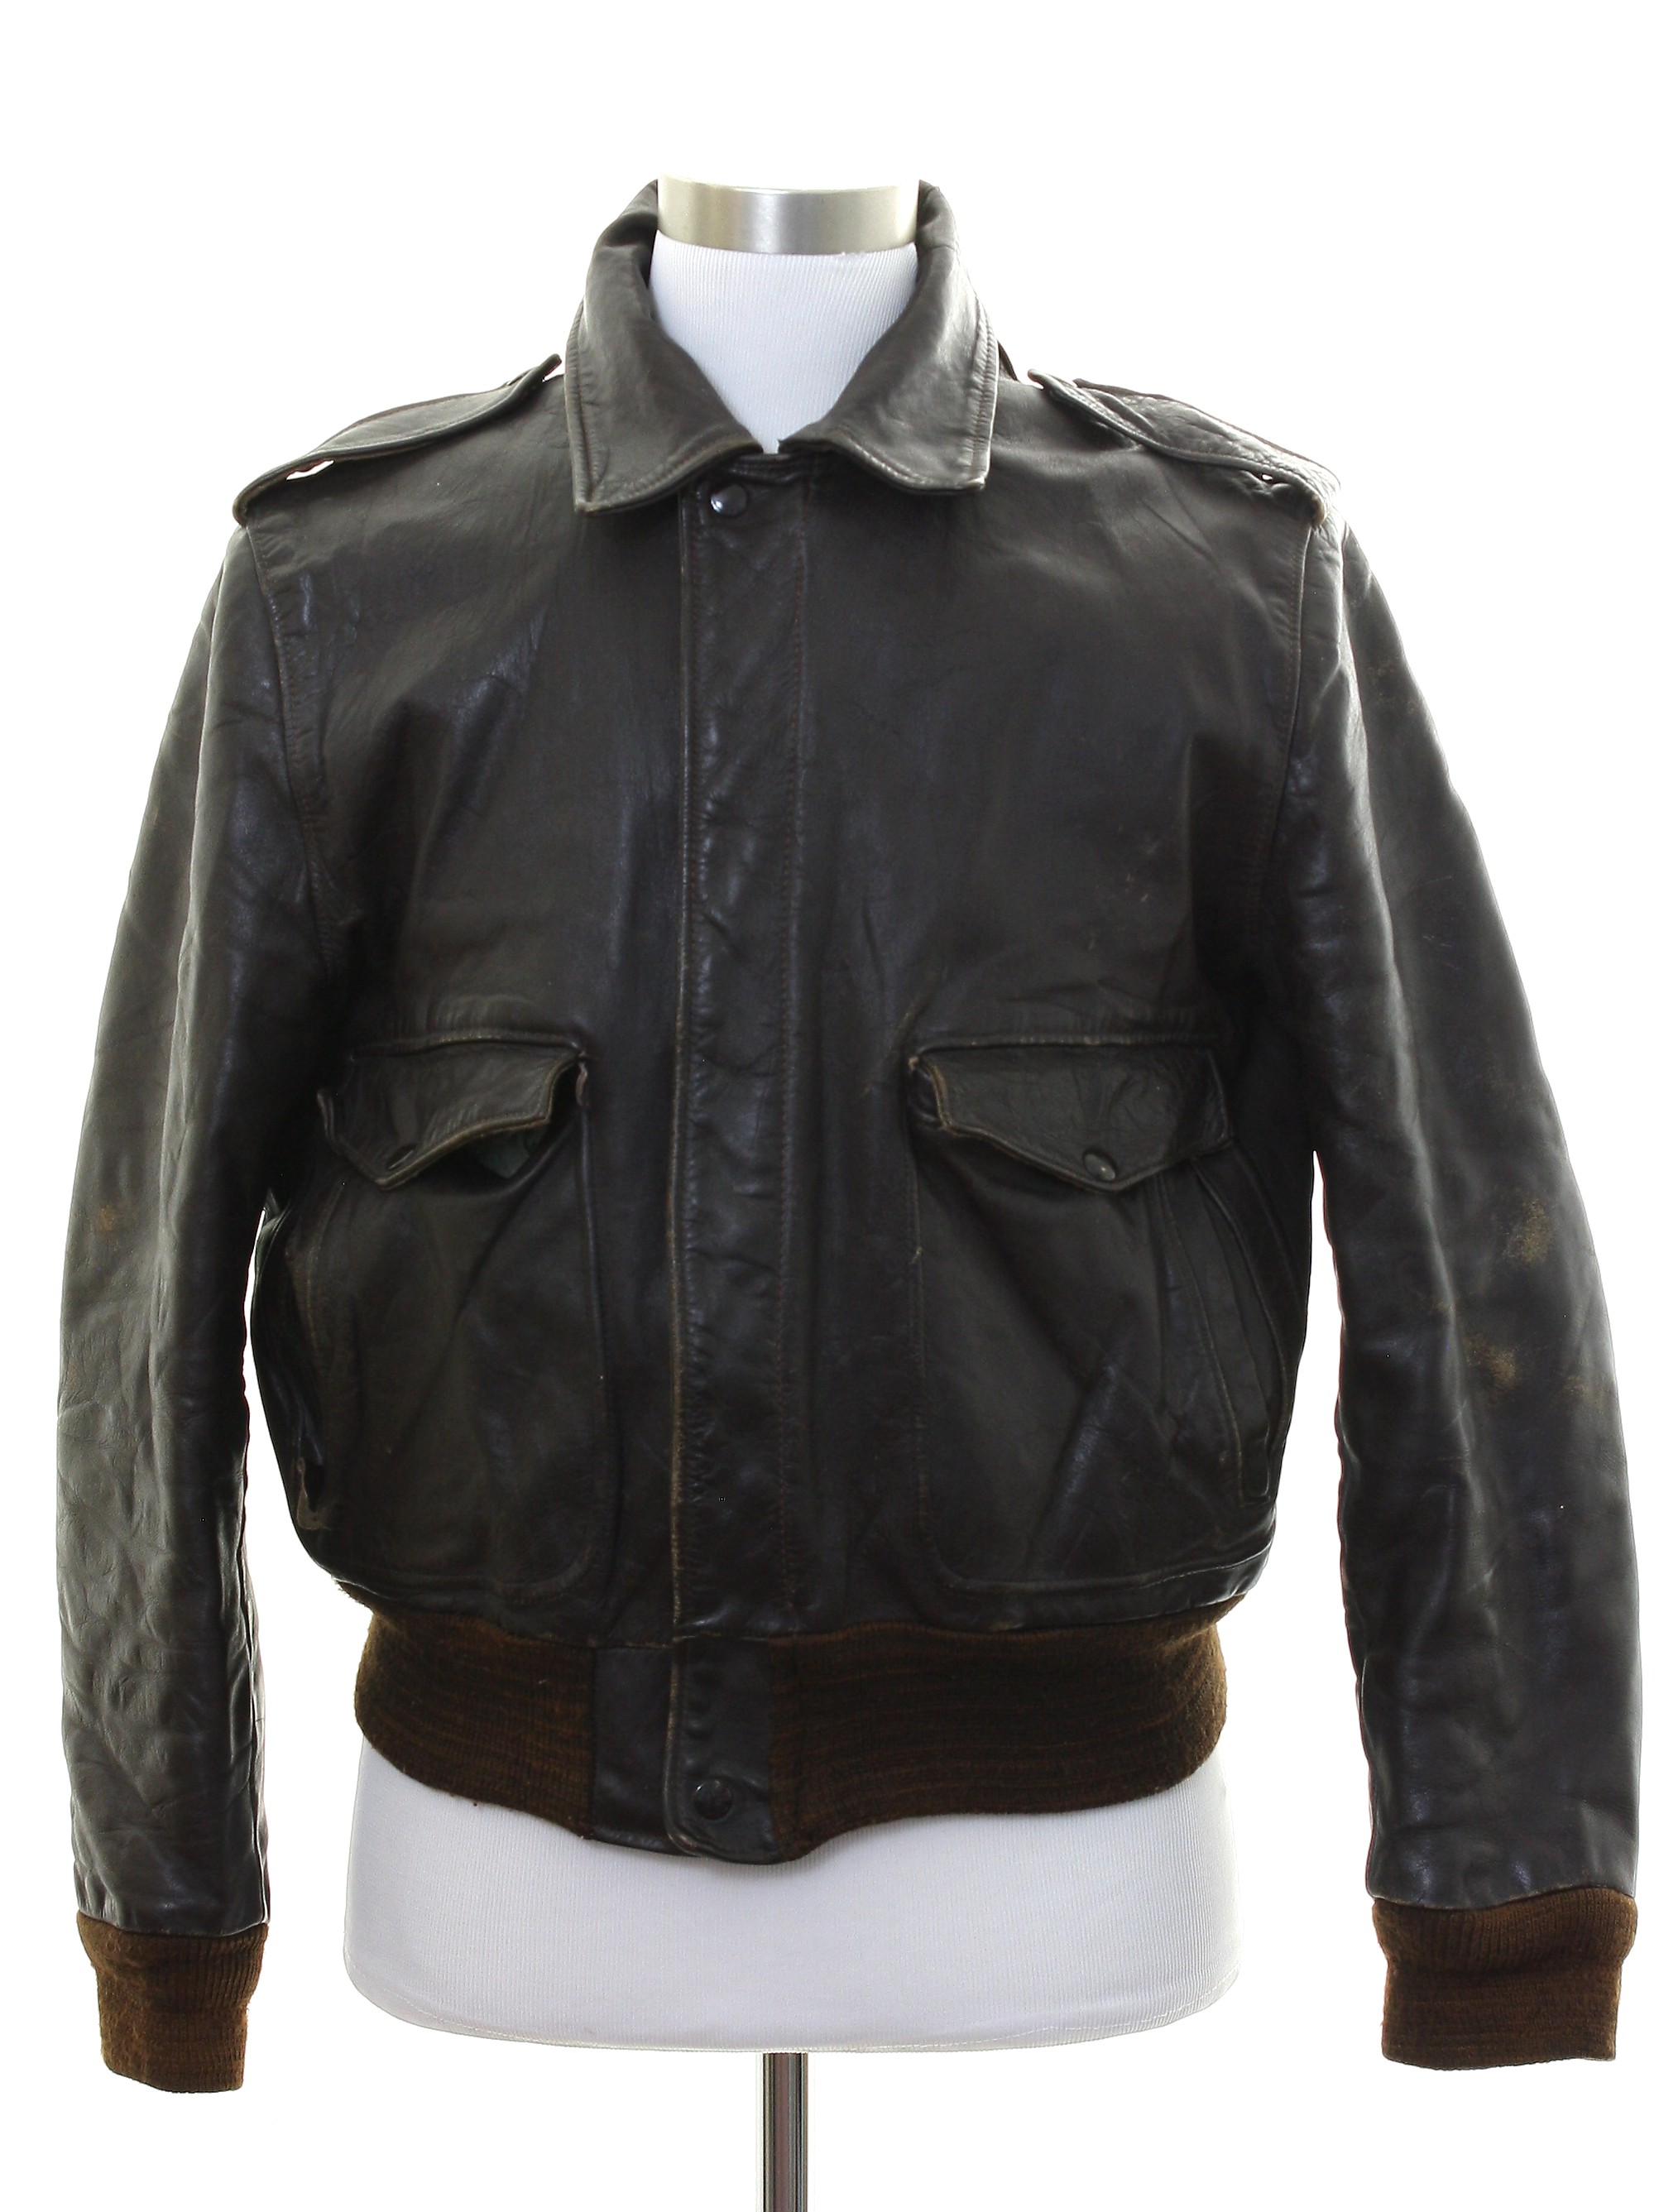 Retro 1960's Leather Jacket (Care Label) : Early 60s -Care Label- Mens ...